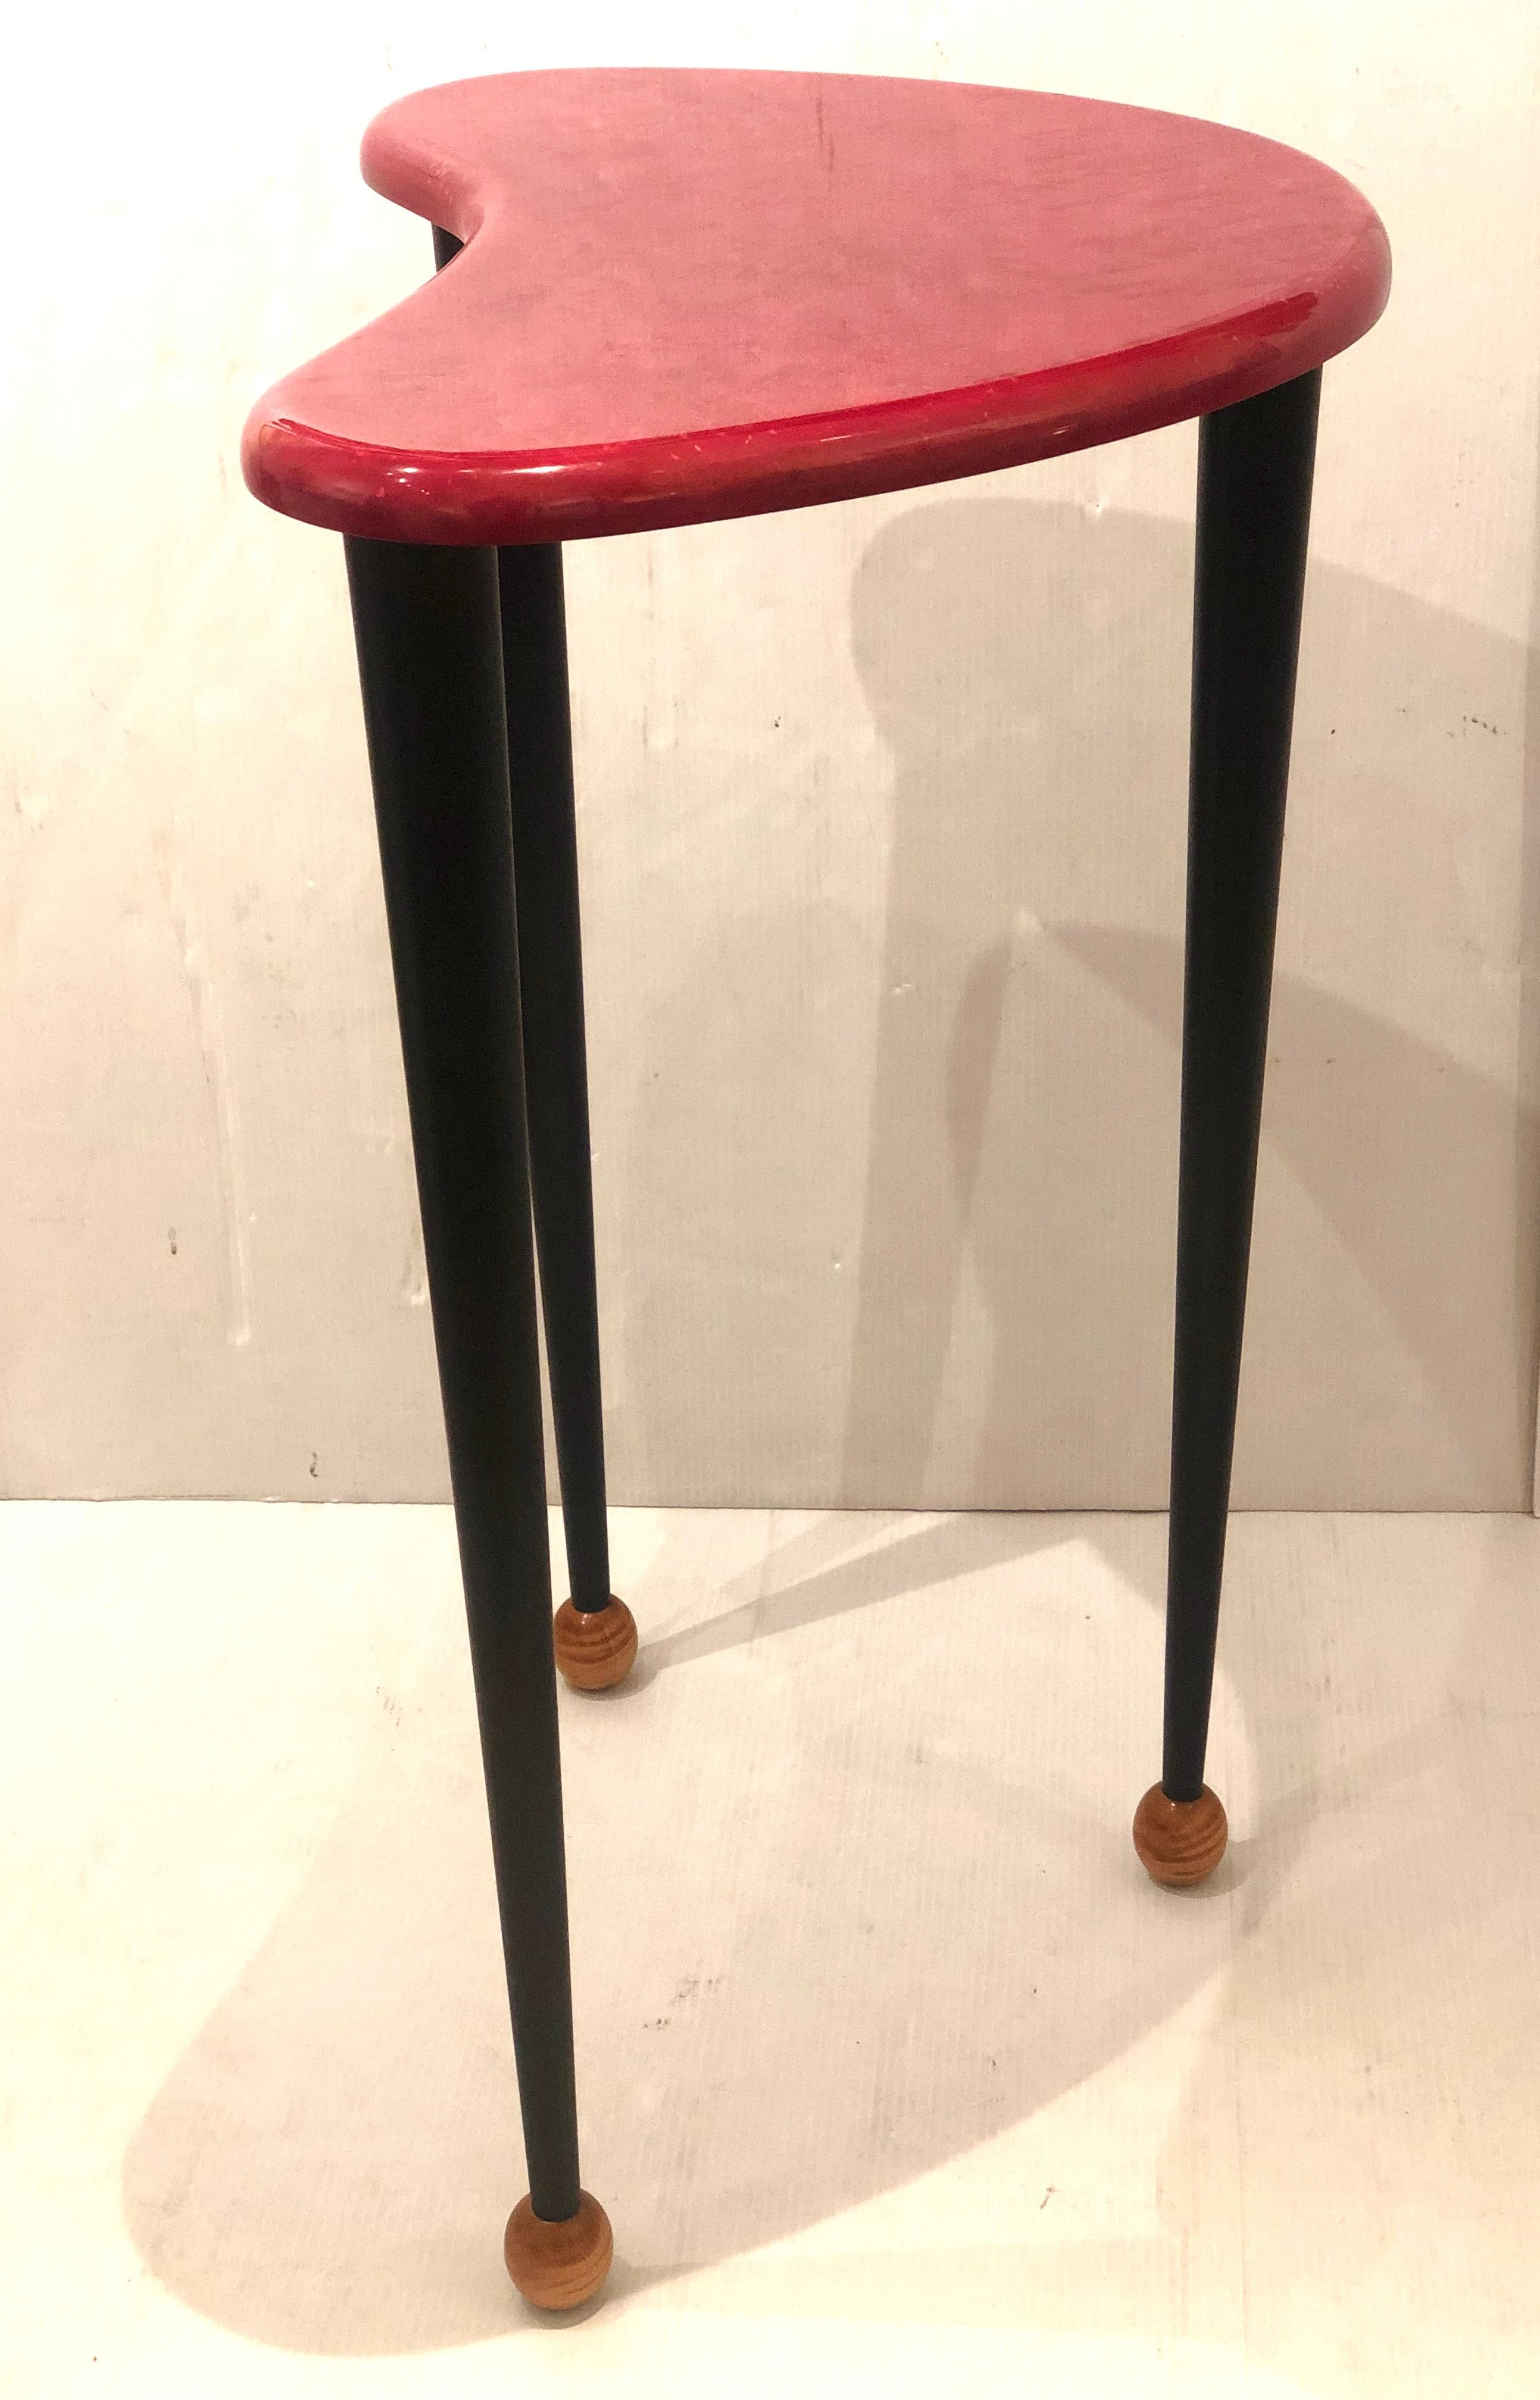 Nice and well done wood tall cocktail table boomerang shape, in pink lacquer finish ebonized black legs, with walnut ball feet , signed and numbered as shown.